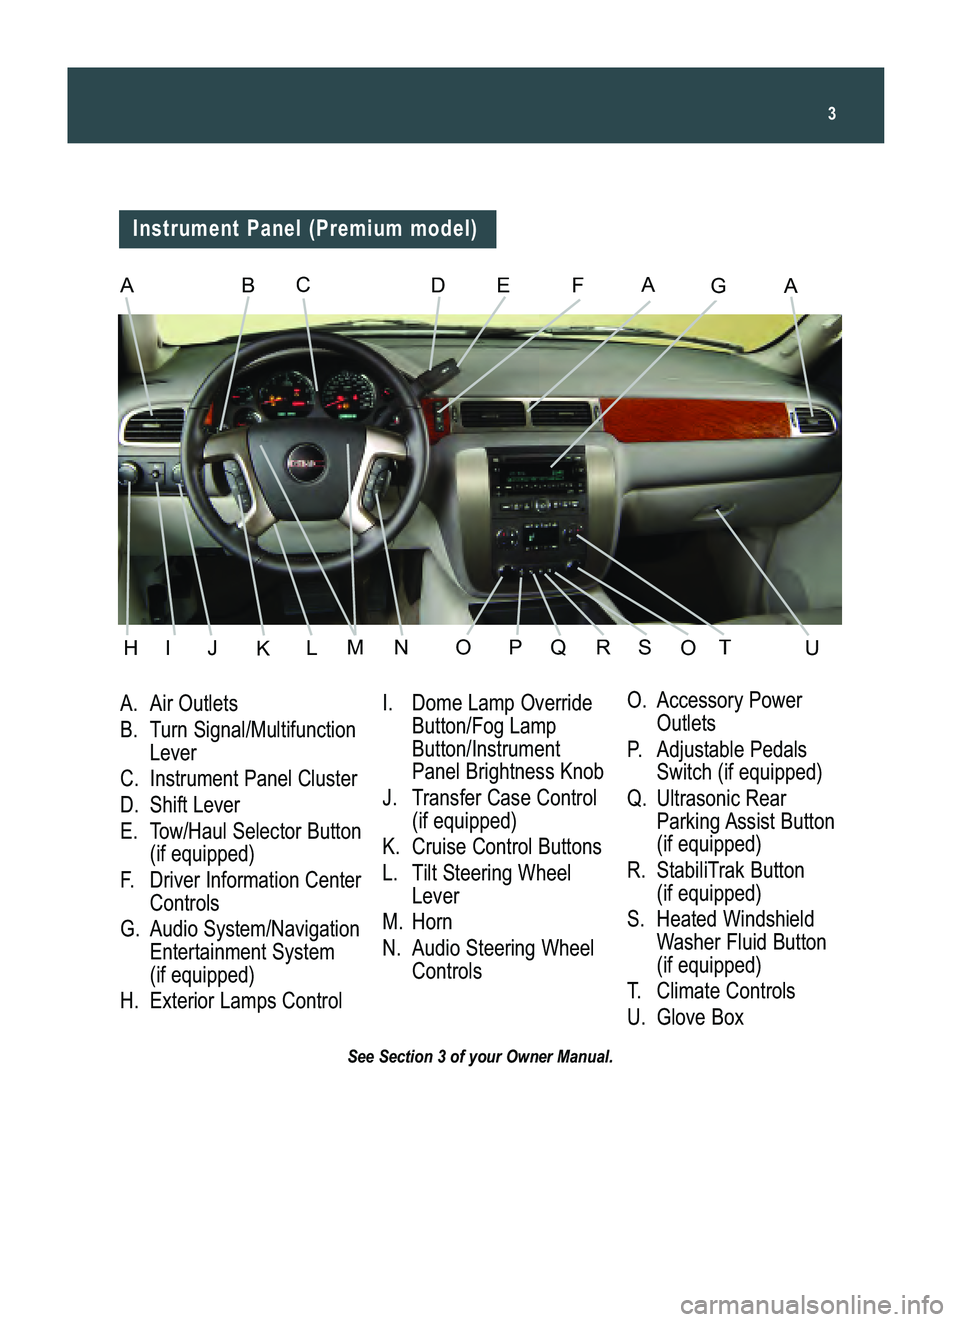 GMC SIERRA 2008  Get To Know Guide 3
See Section 3 of your Owner Manual.
A. Air Outlets
B.Turn Signal/Multifunction
Lever
C.Instrument Panel Cluster
D. Shift Lever
E. Tow/Haul Selector Button
(if equipped)
F. Driver Information Center
